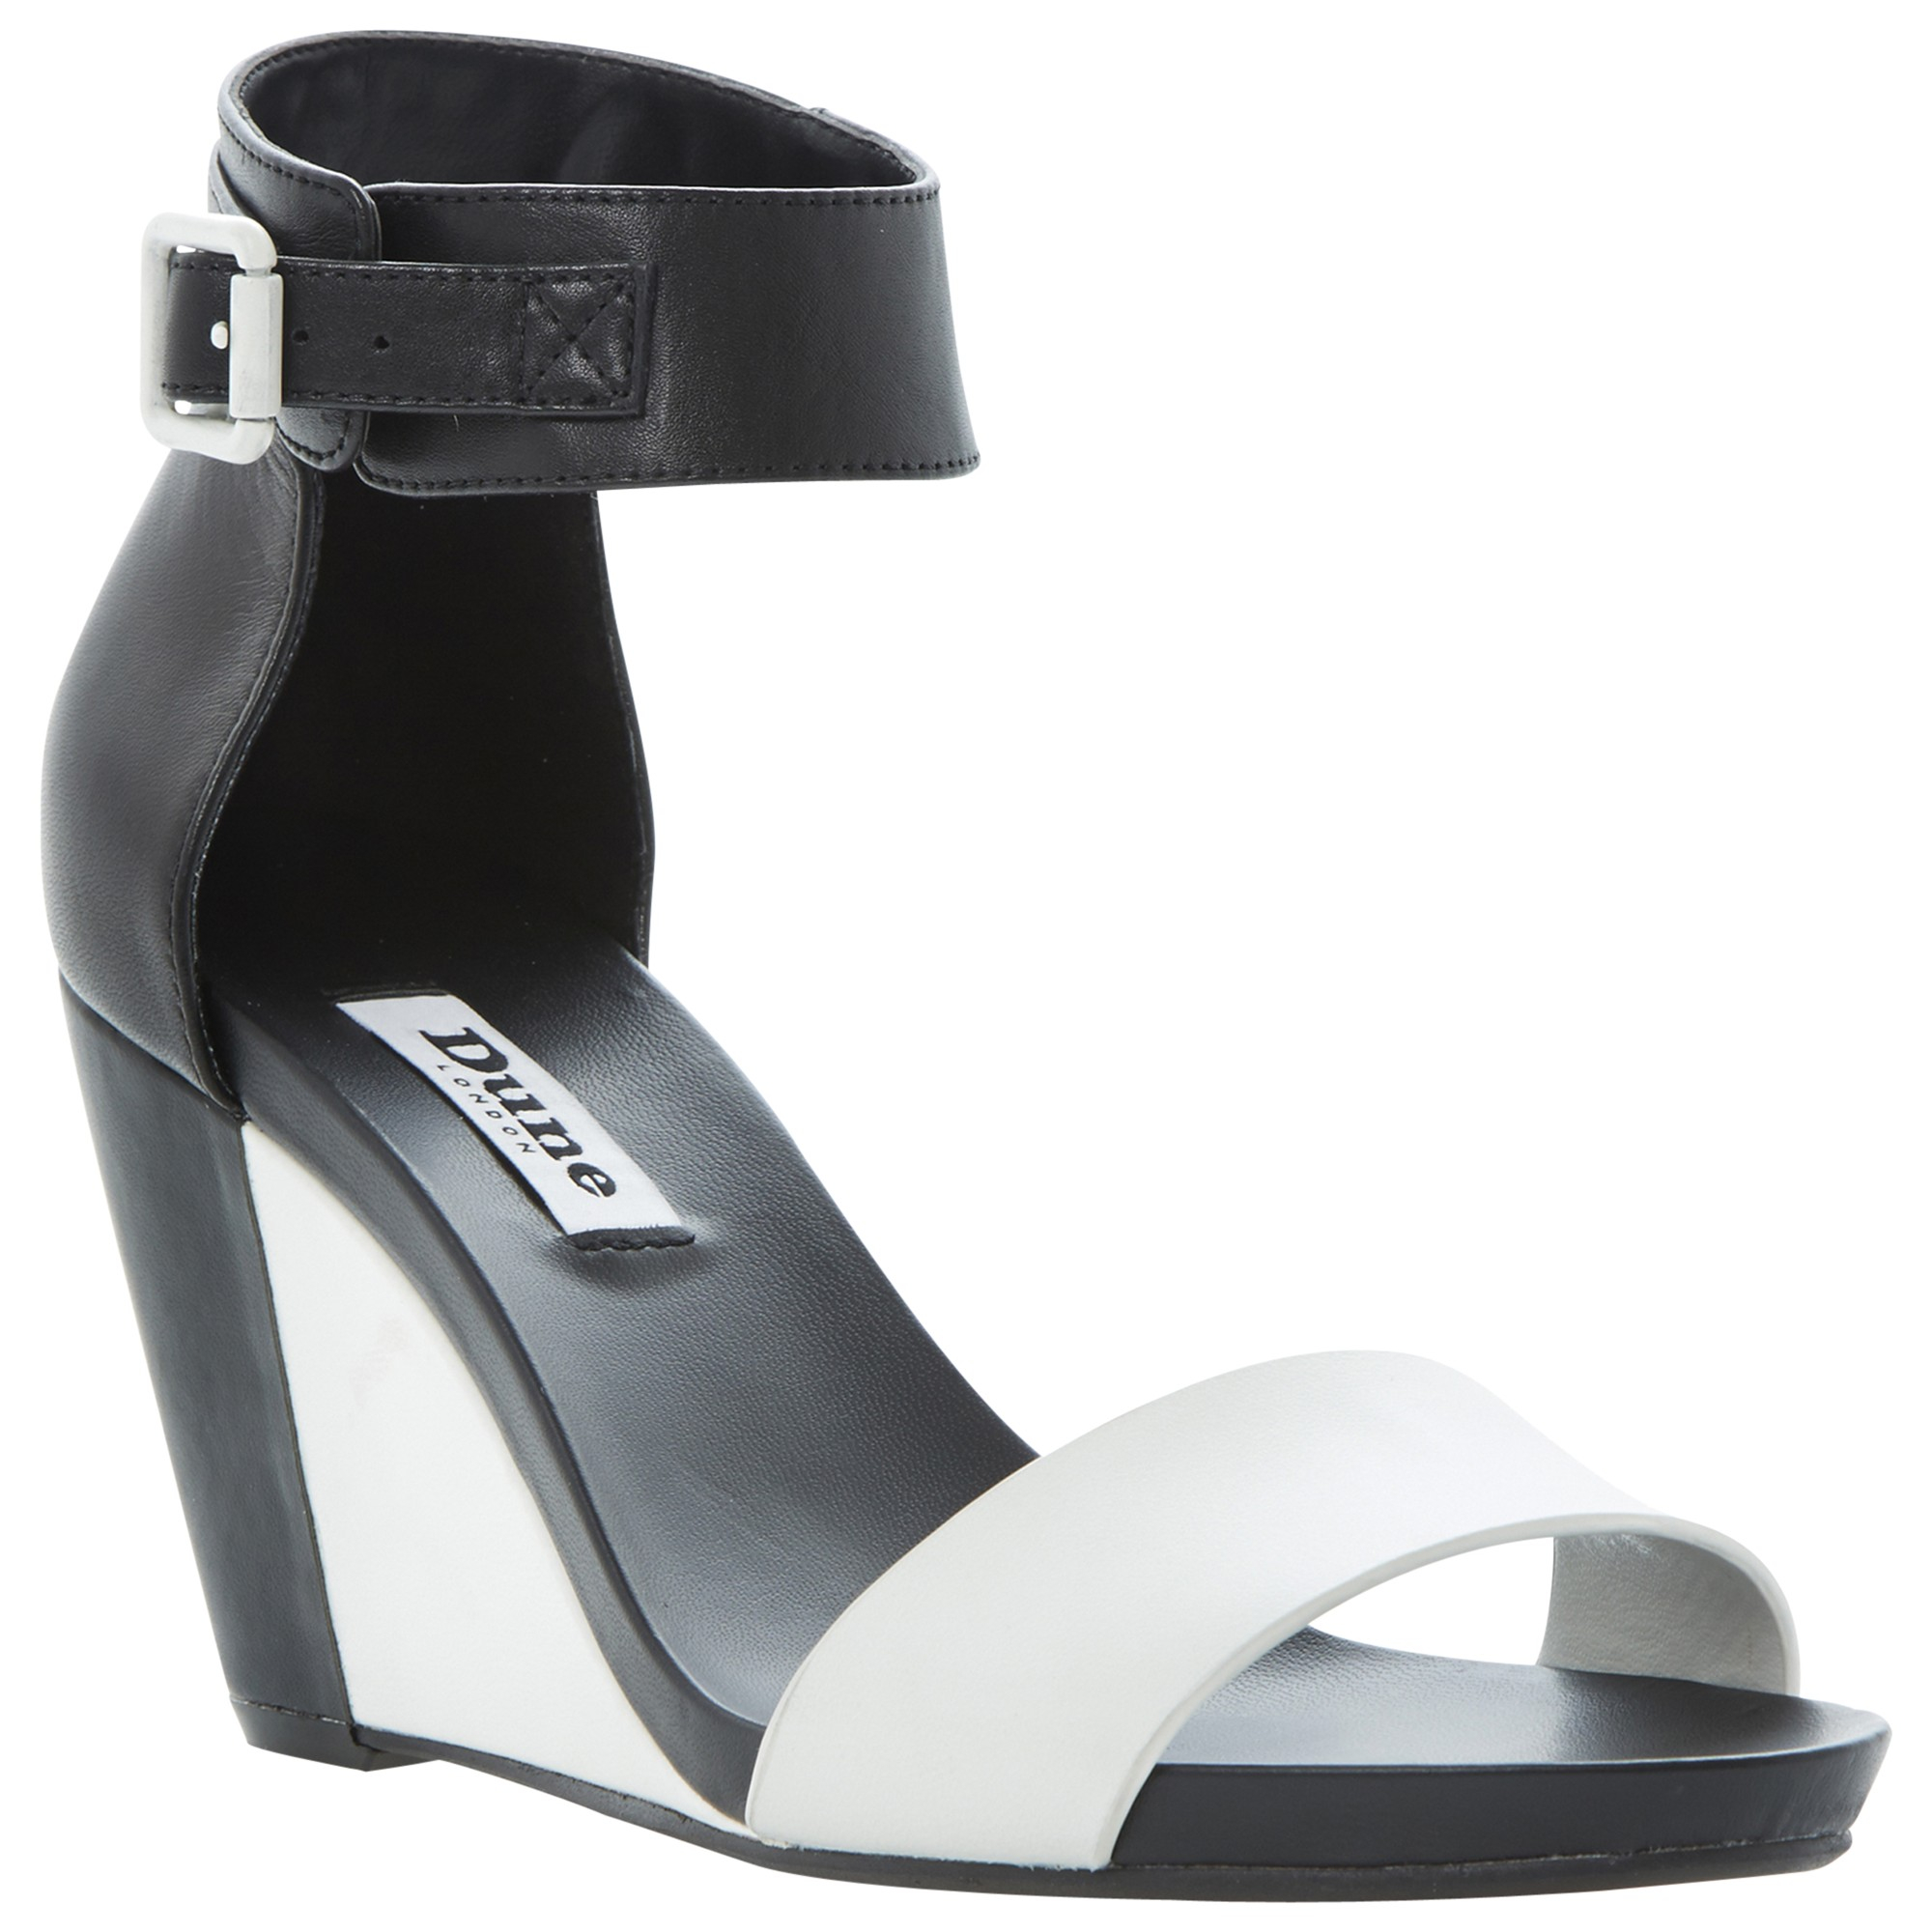 Black Sandals: Black And White Wedge Sandals